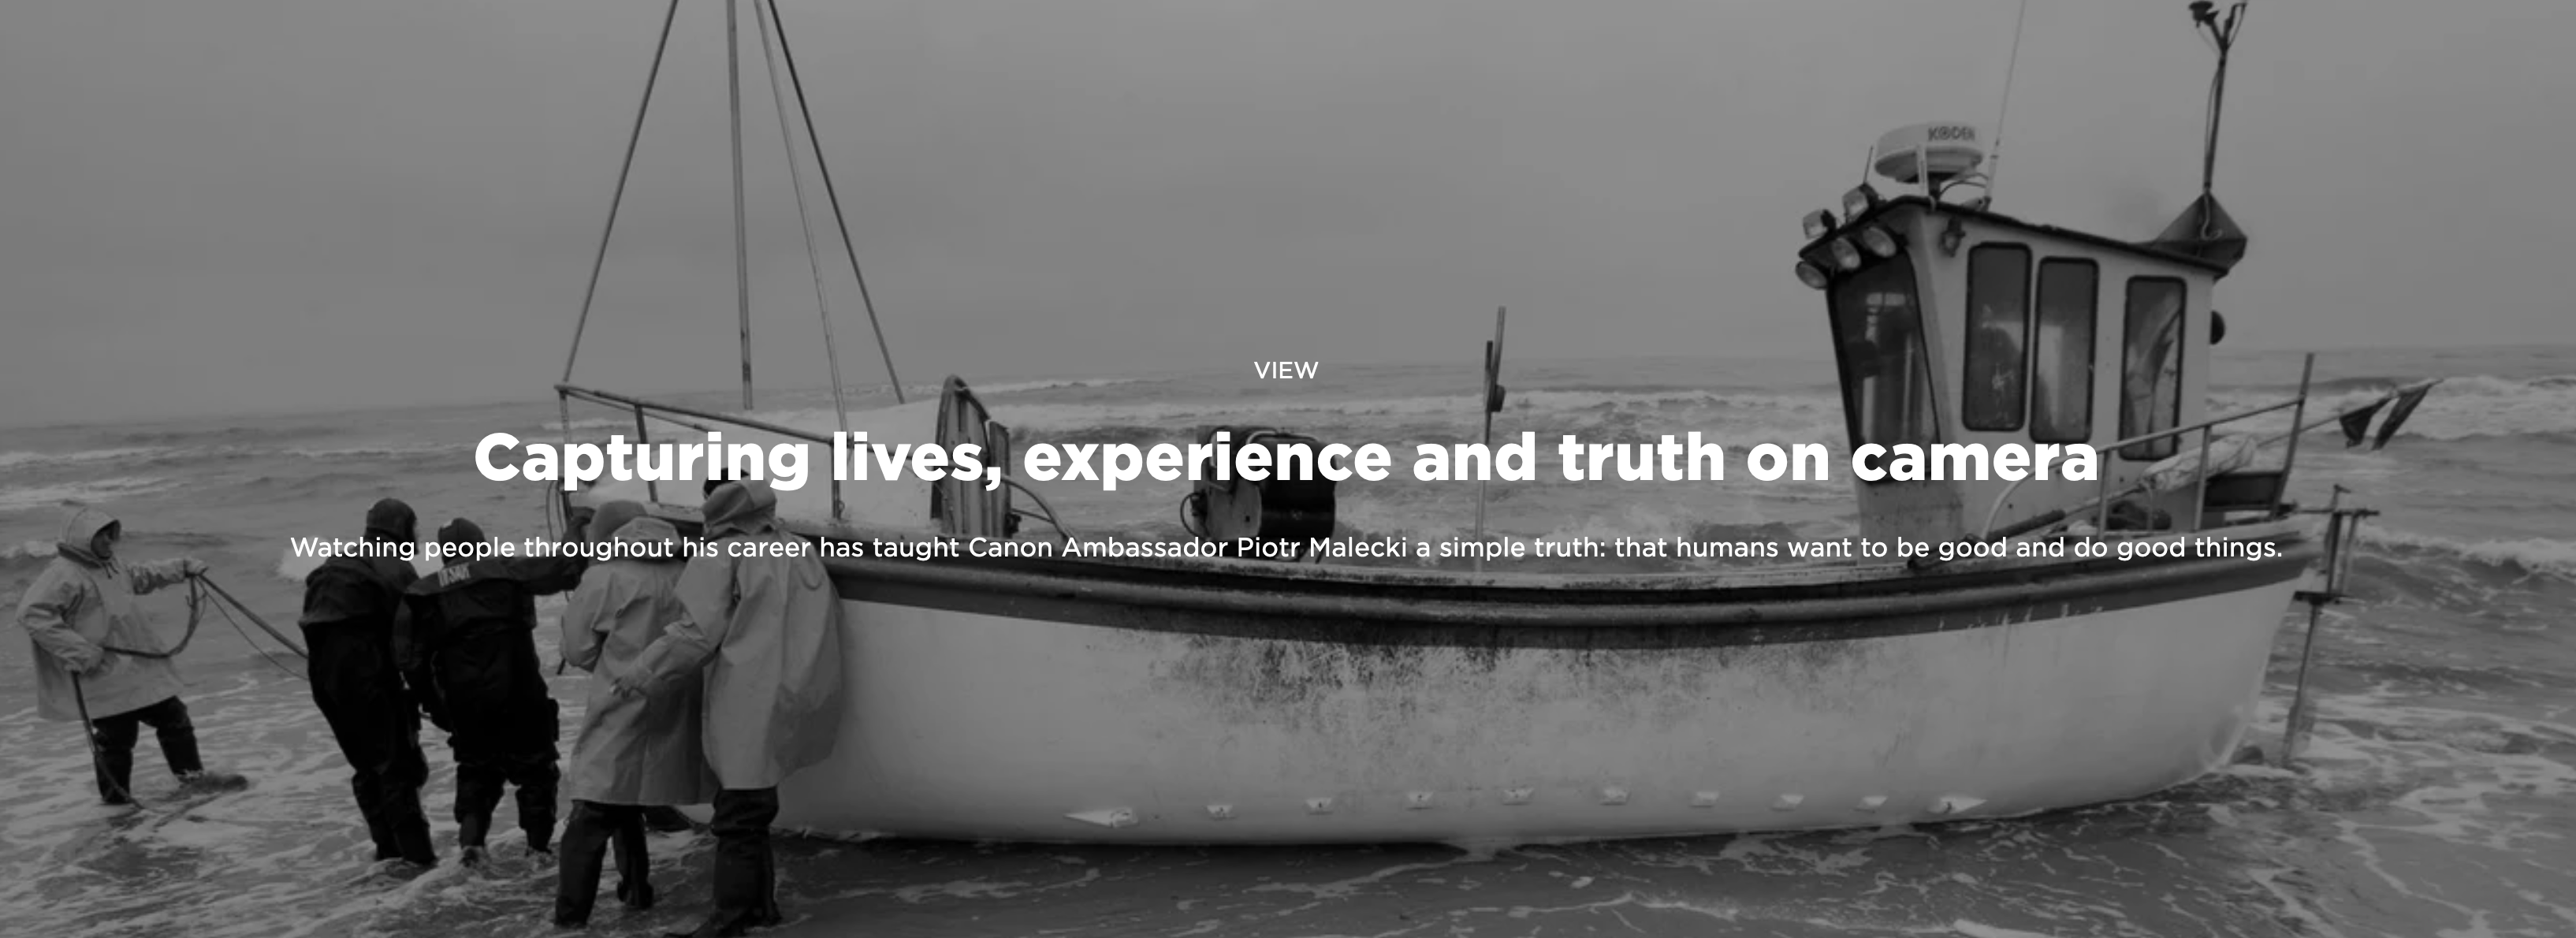 Canon VIEW: Capturing lives, experience and truth on camera - Canon Europe